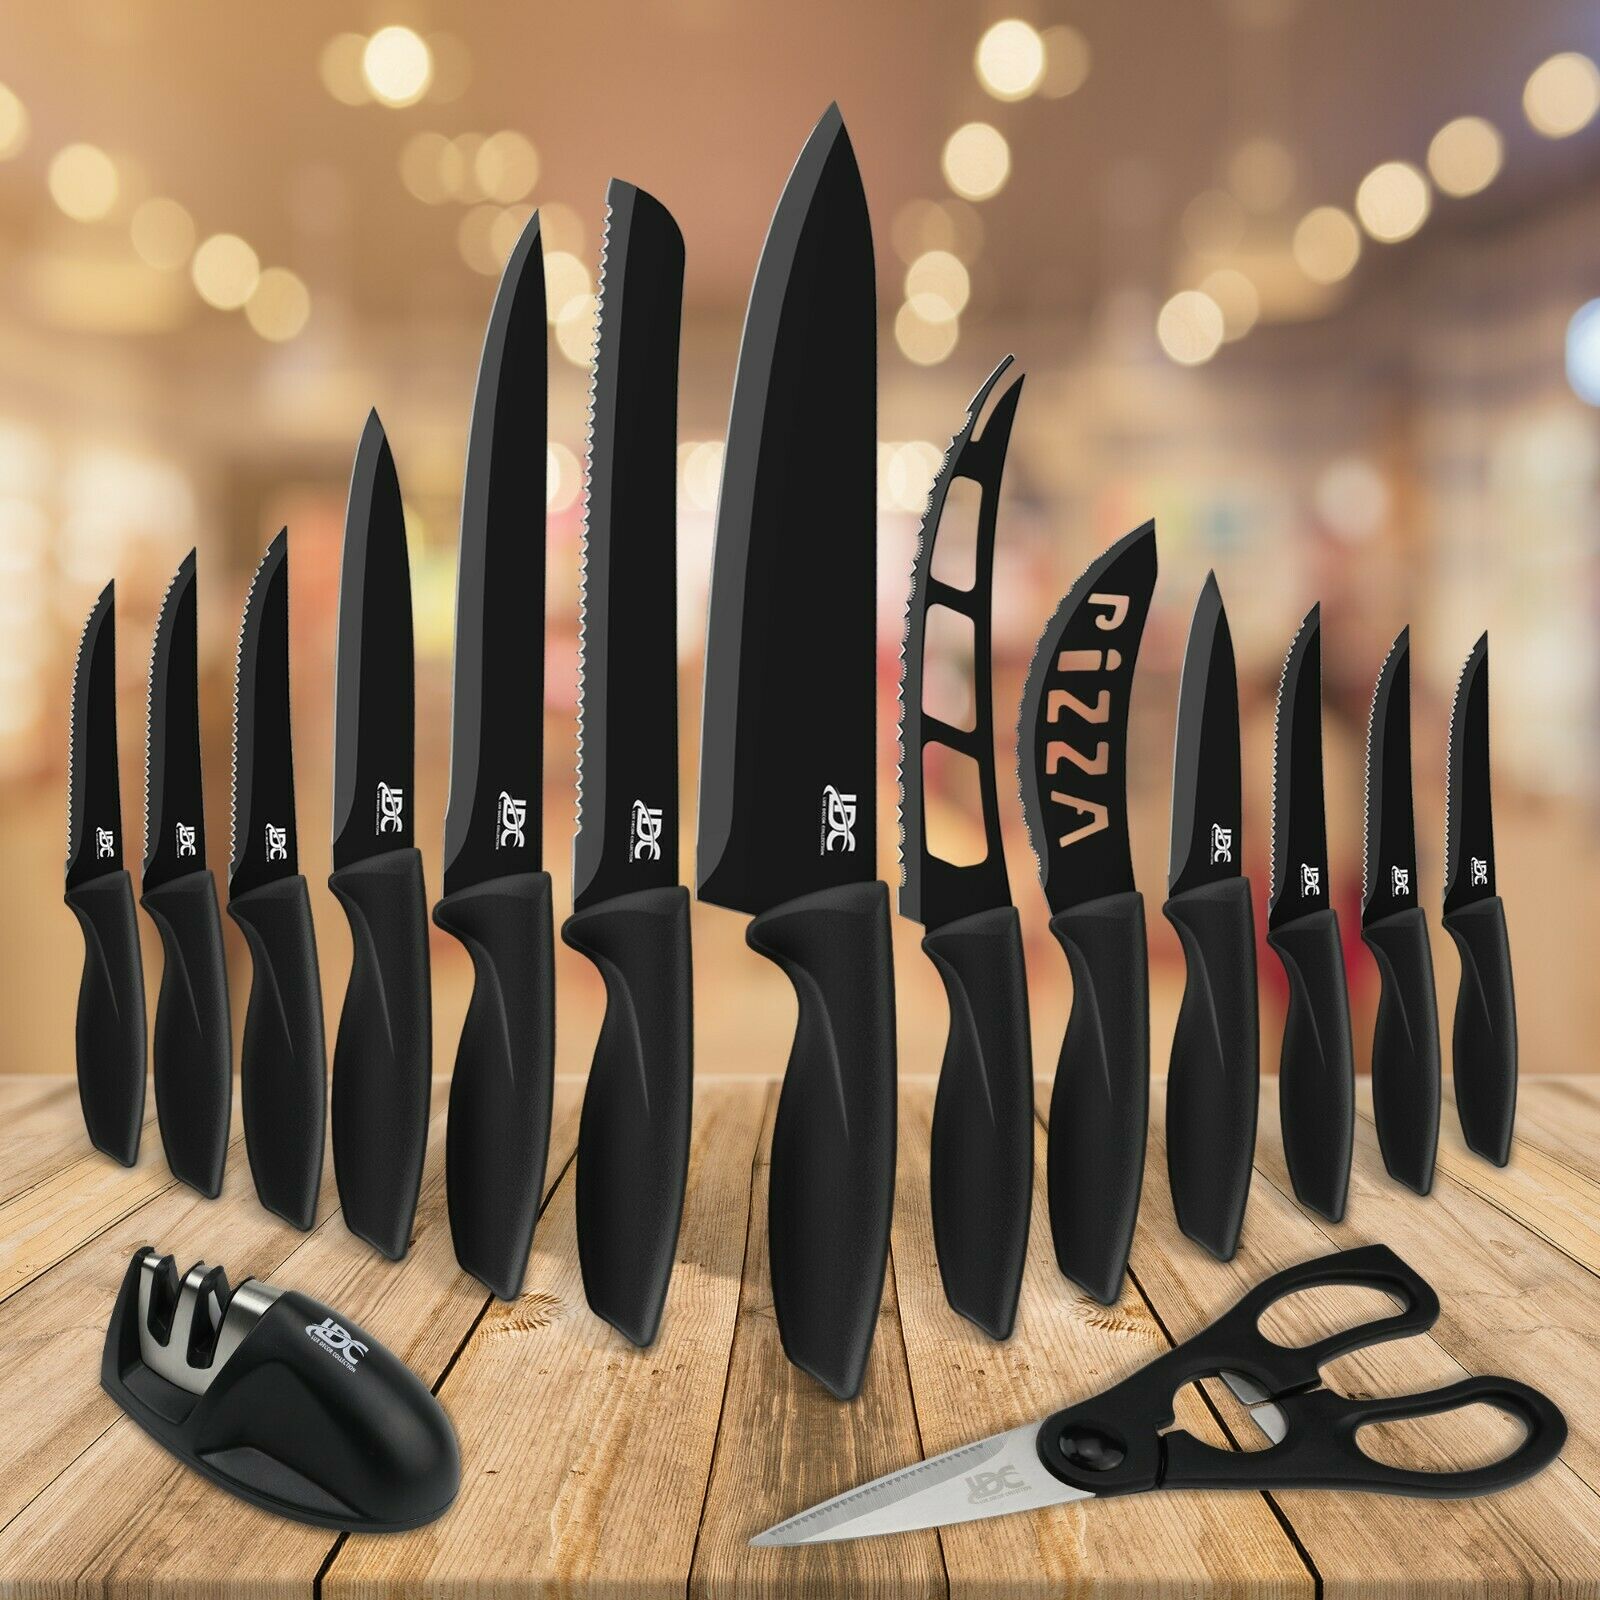 Knife Set Sharp Stainless Steel Professional Chef Cutlery Steak Kitchen Knives